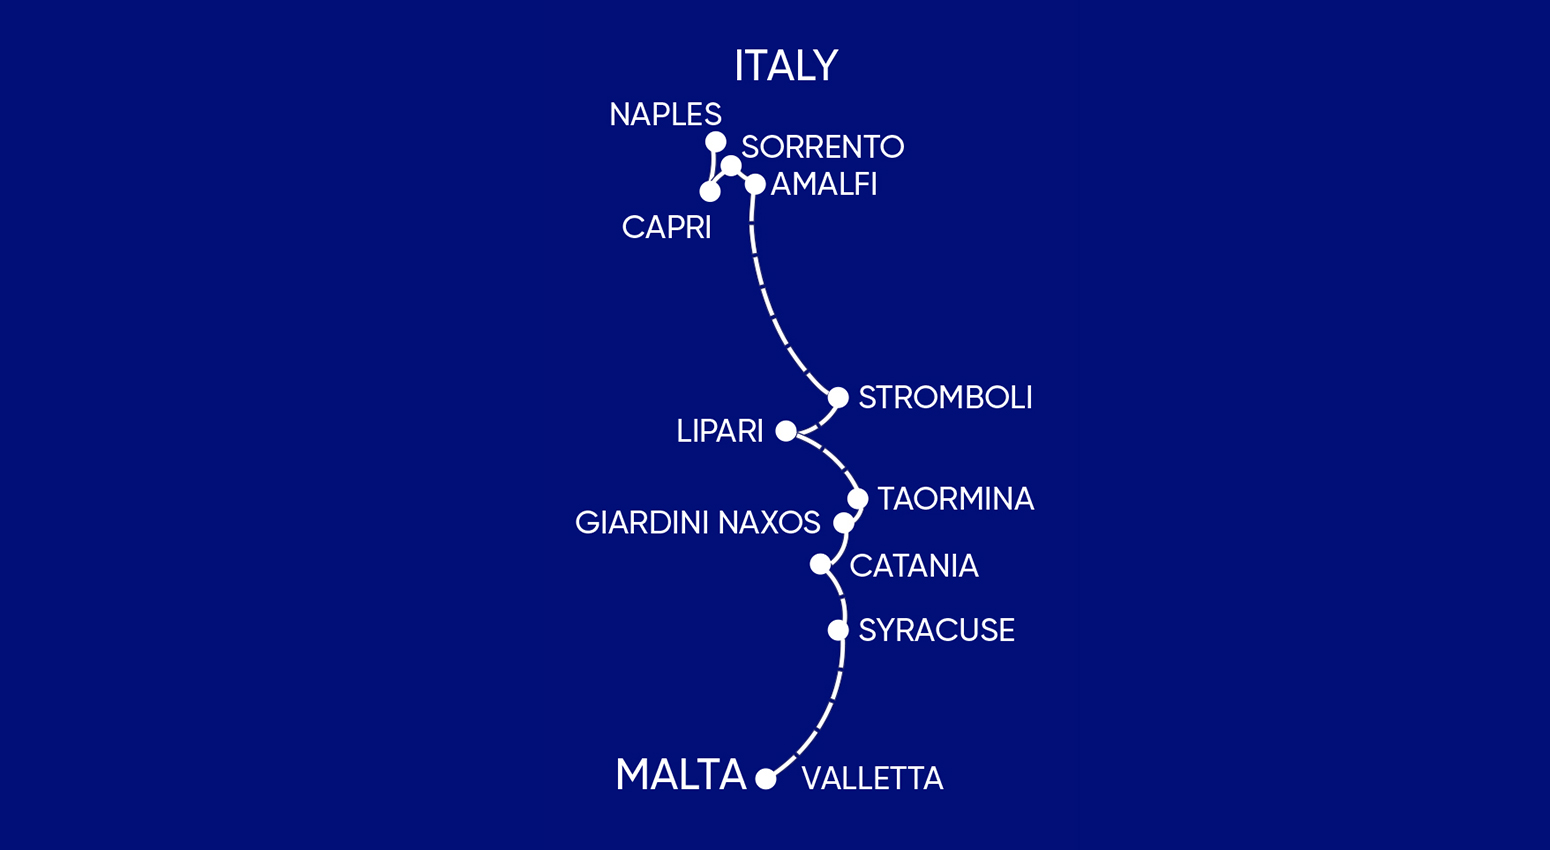 A tour map of Italy and Malta